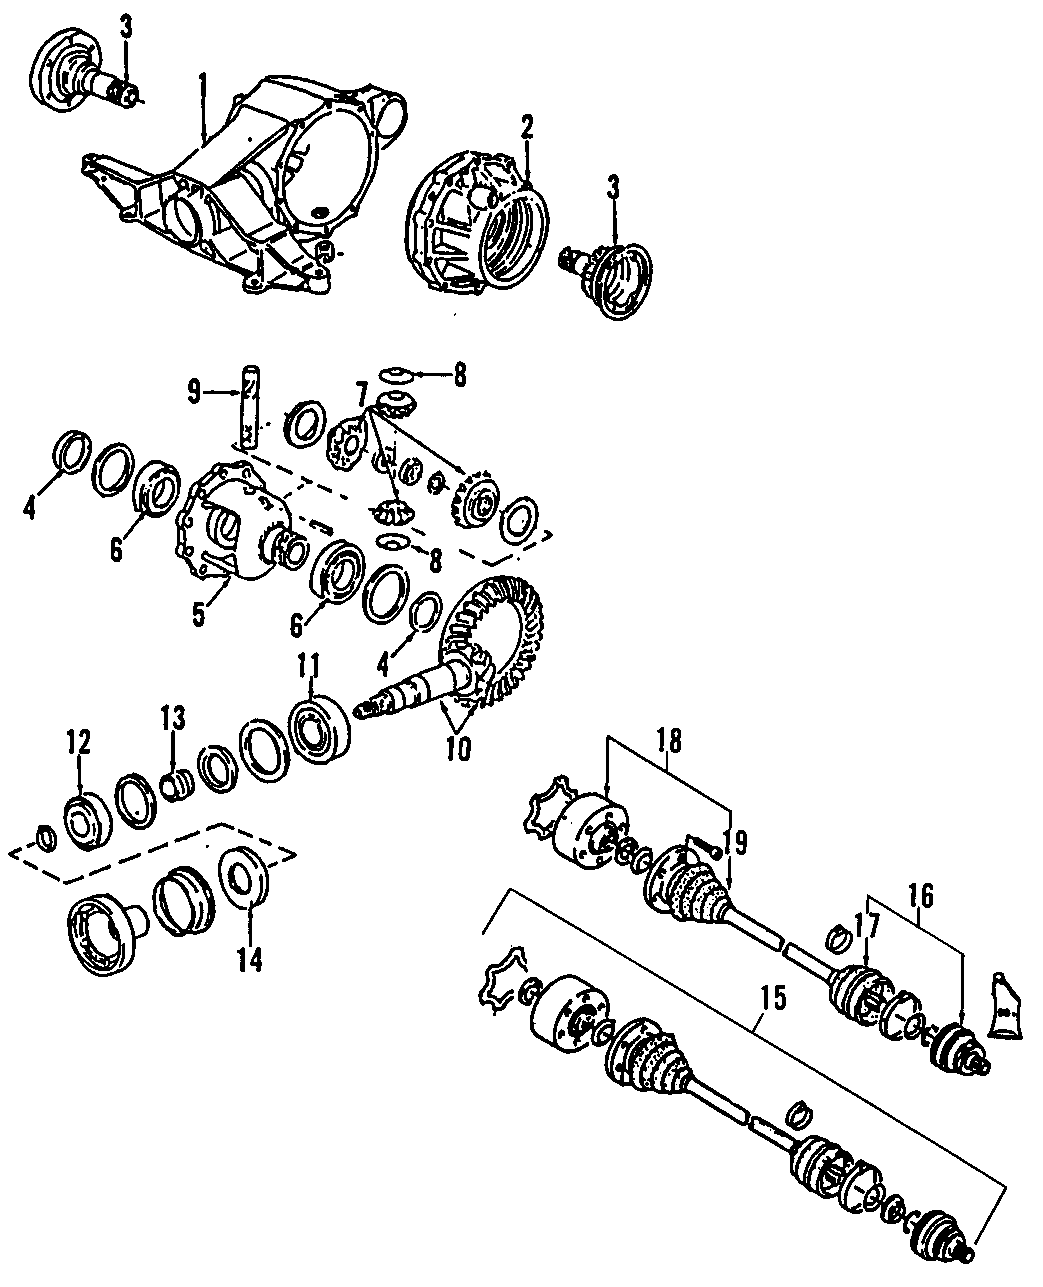 7DRIVE AXLES. REAR AXLE. AXLE SHAFTS & JOINTS. DIFFERENTIAL. PROPELLER SHAFT.https://images.simplepart.com/images/parts/motor/fullsize/E255240.png